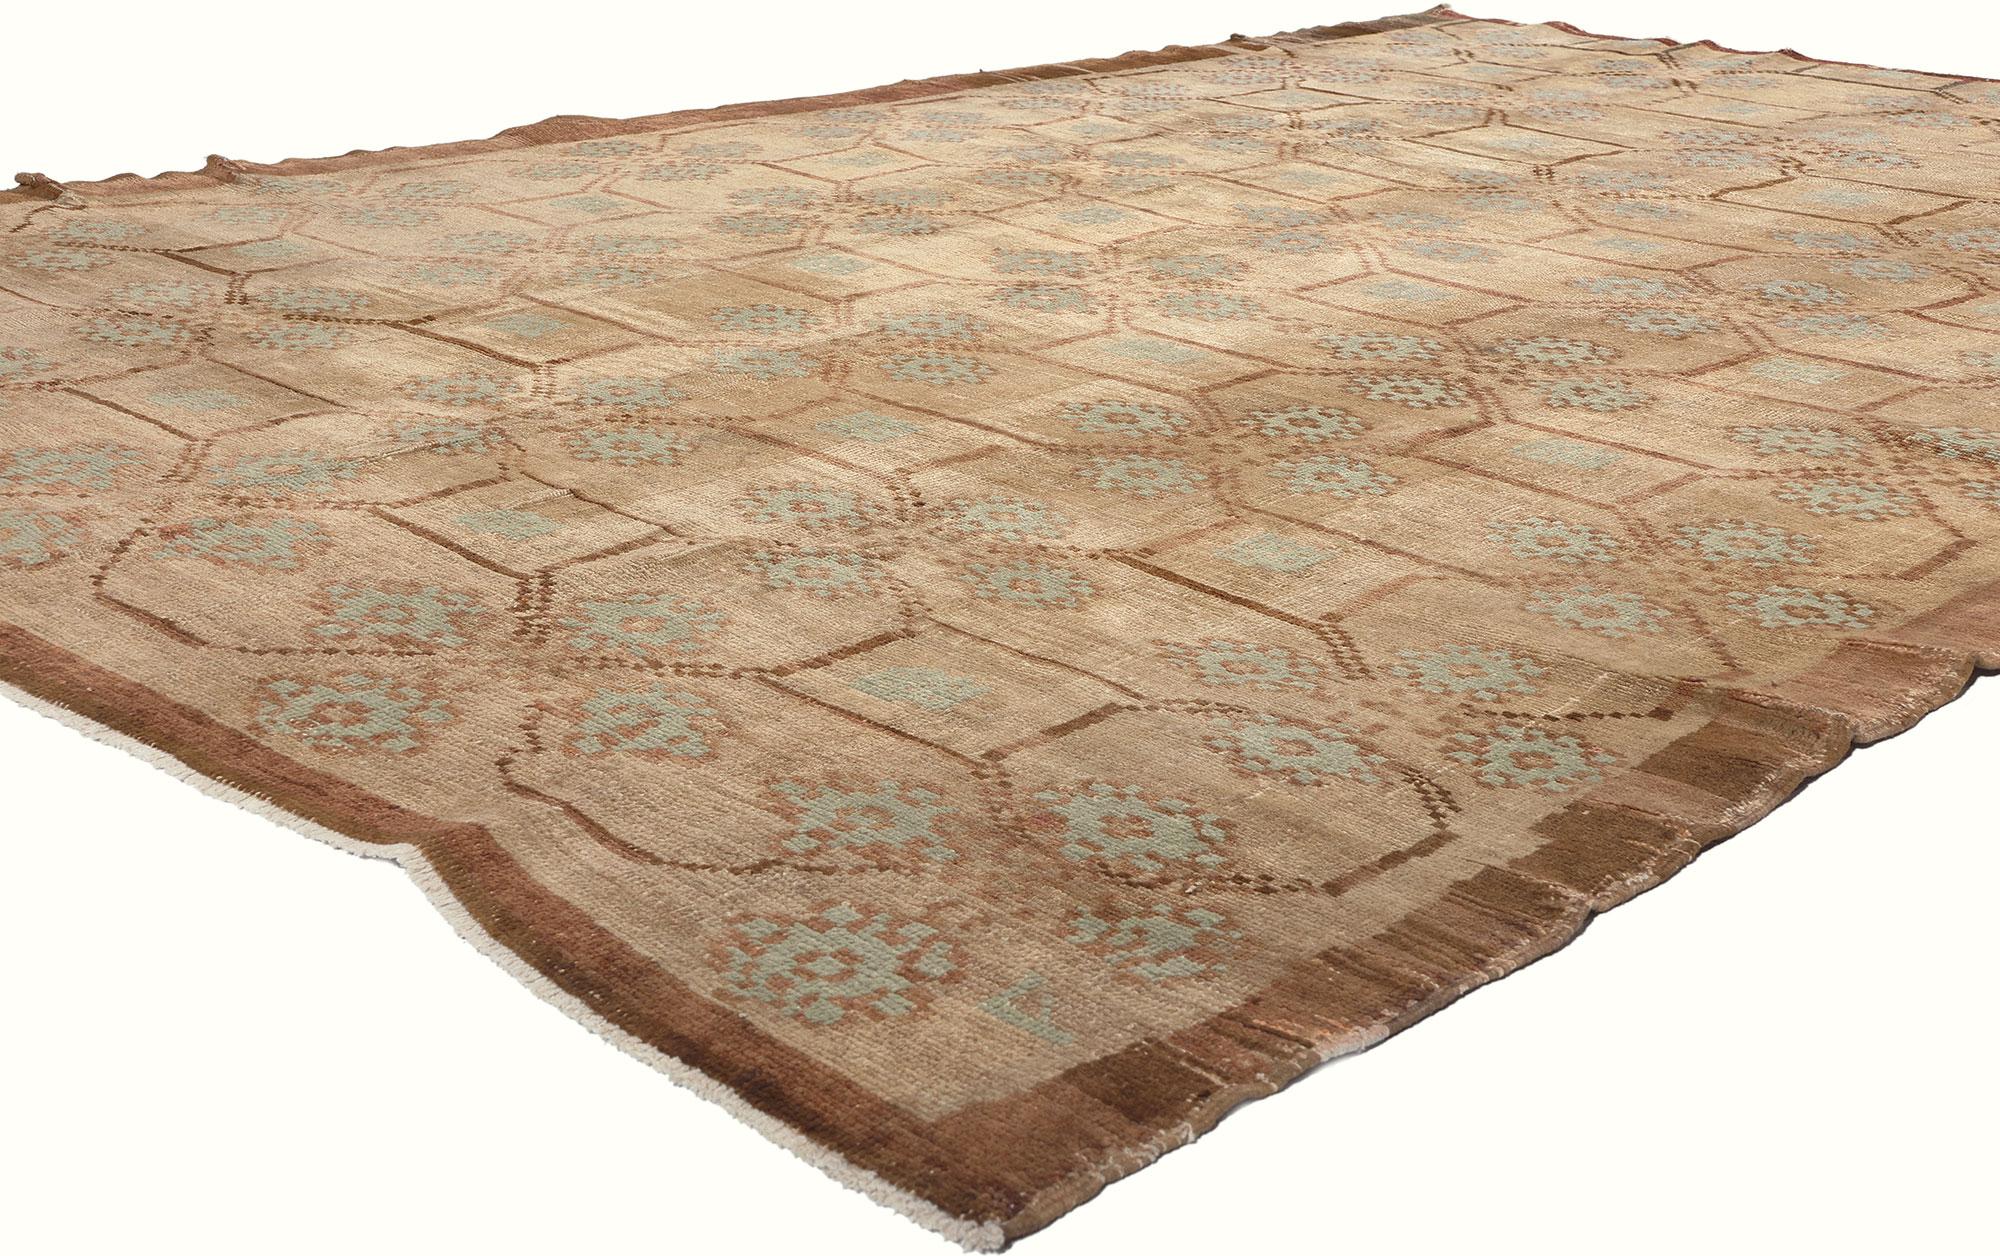 50563 Vintage Turkish Oushak Rug, 06'09 X 09'08. Enter the realm of Organic Modern style with this hand-knotted wool antique-washed vintage Turkish Oushak rug, where Biophilic Design principles infuse nature-inspired charm into every thread. A